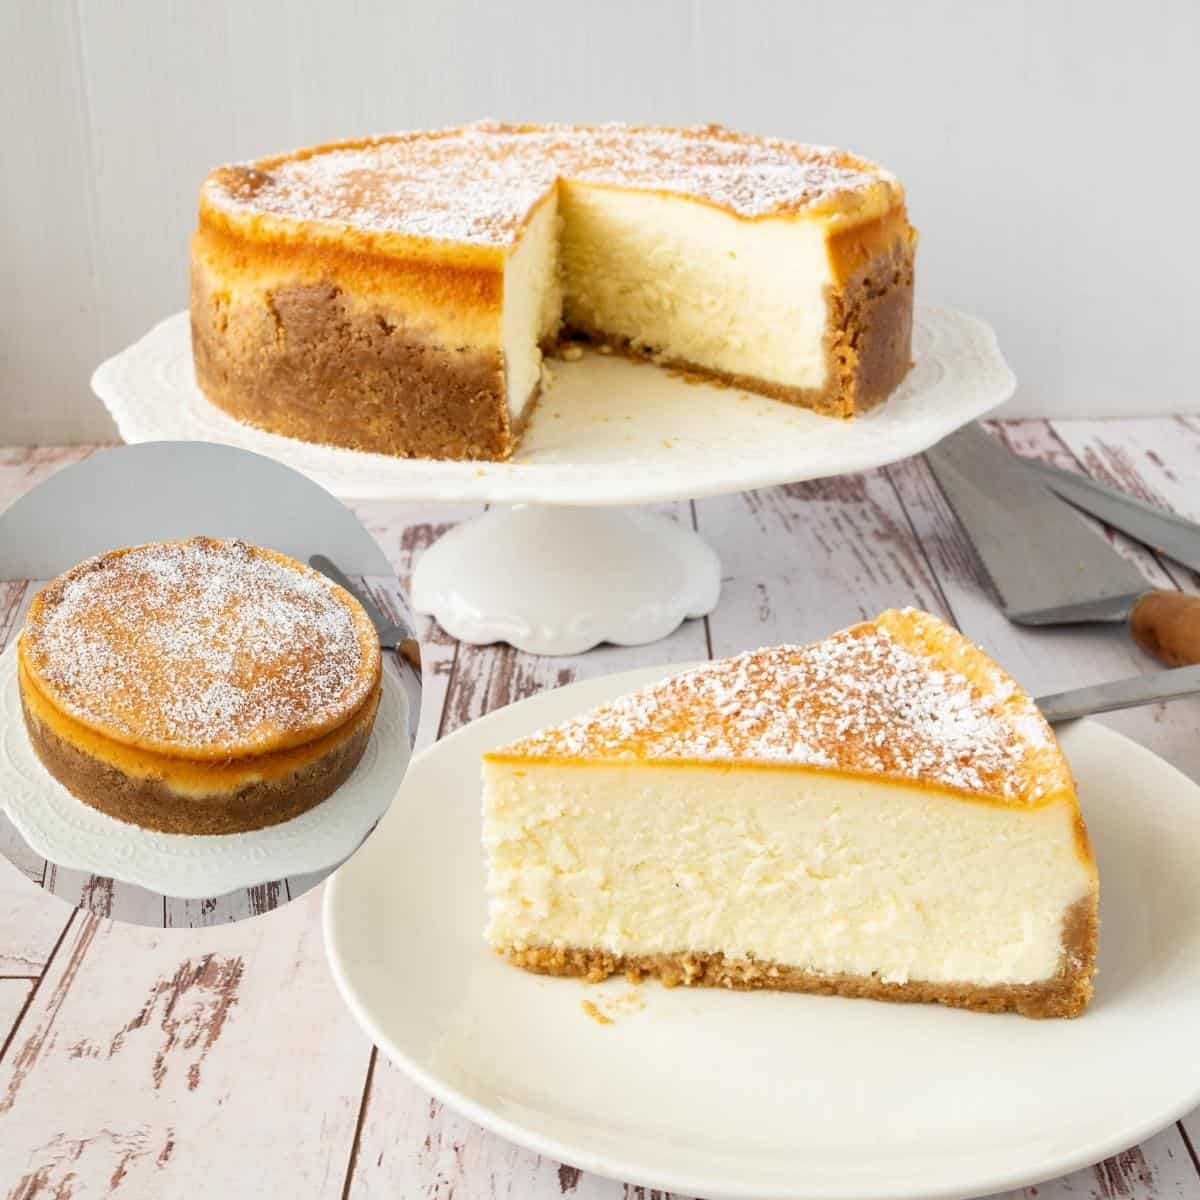 Sliced baked cheesecake on a cake stand and plate.